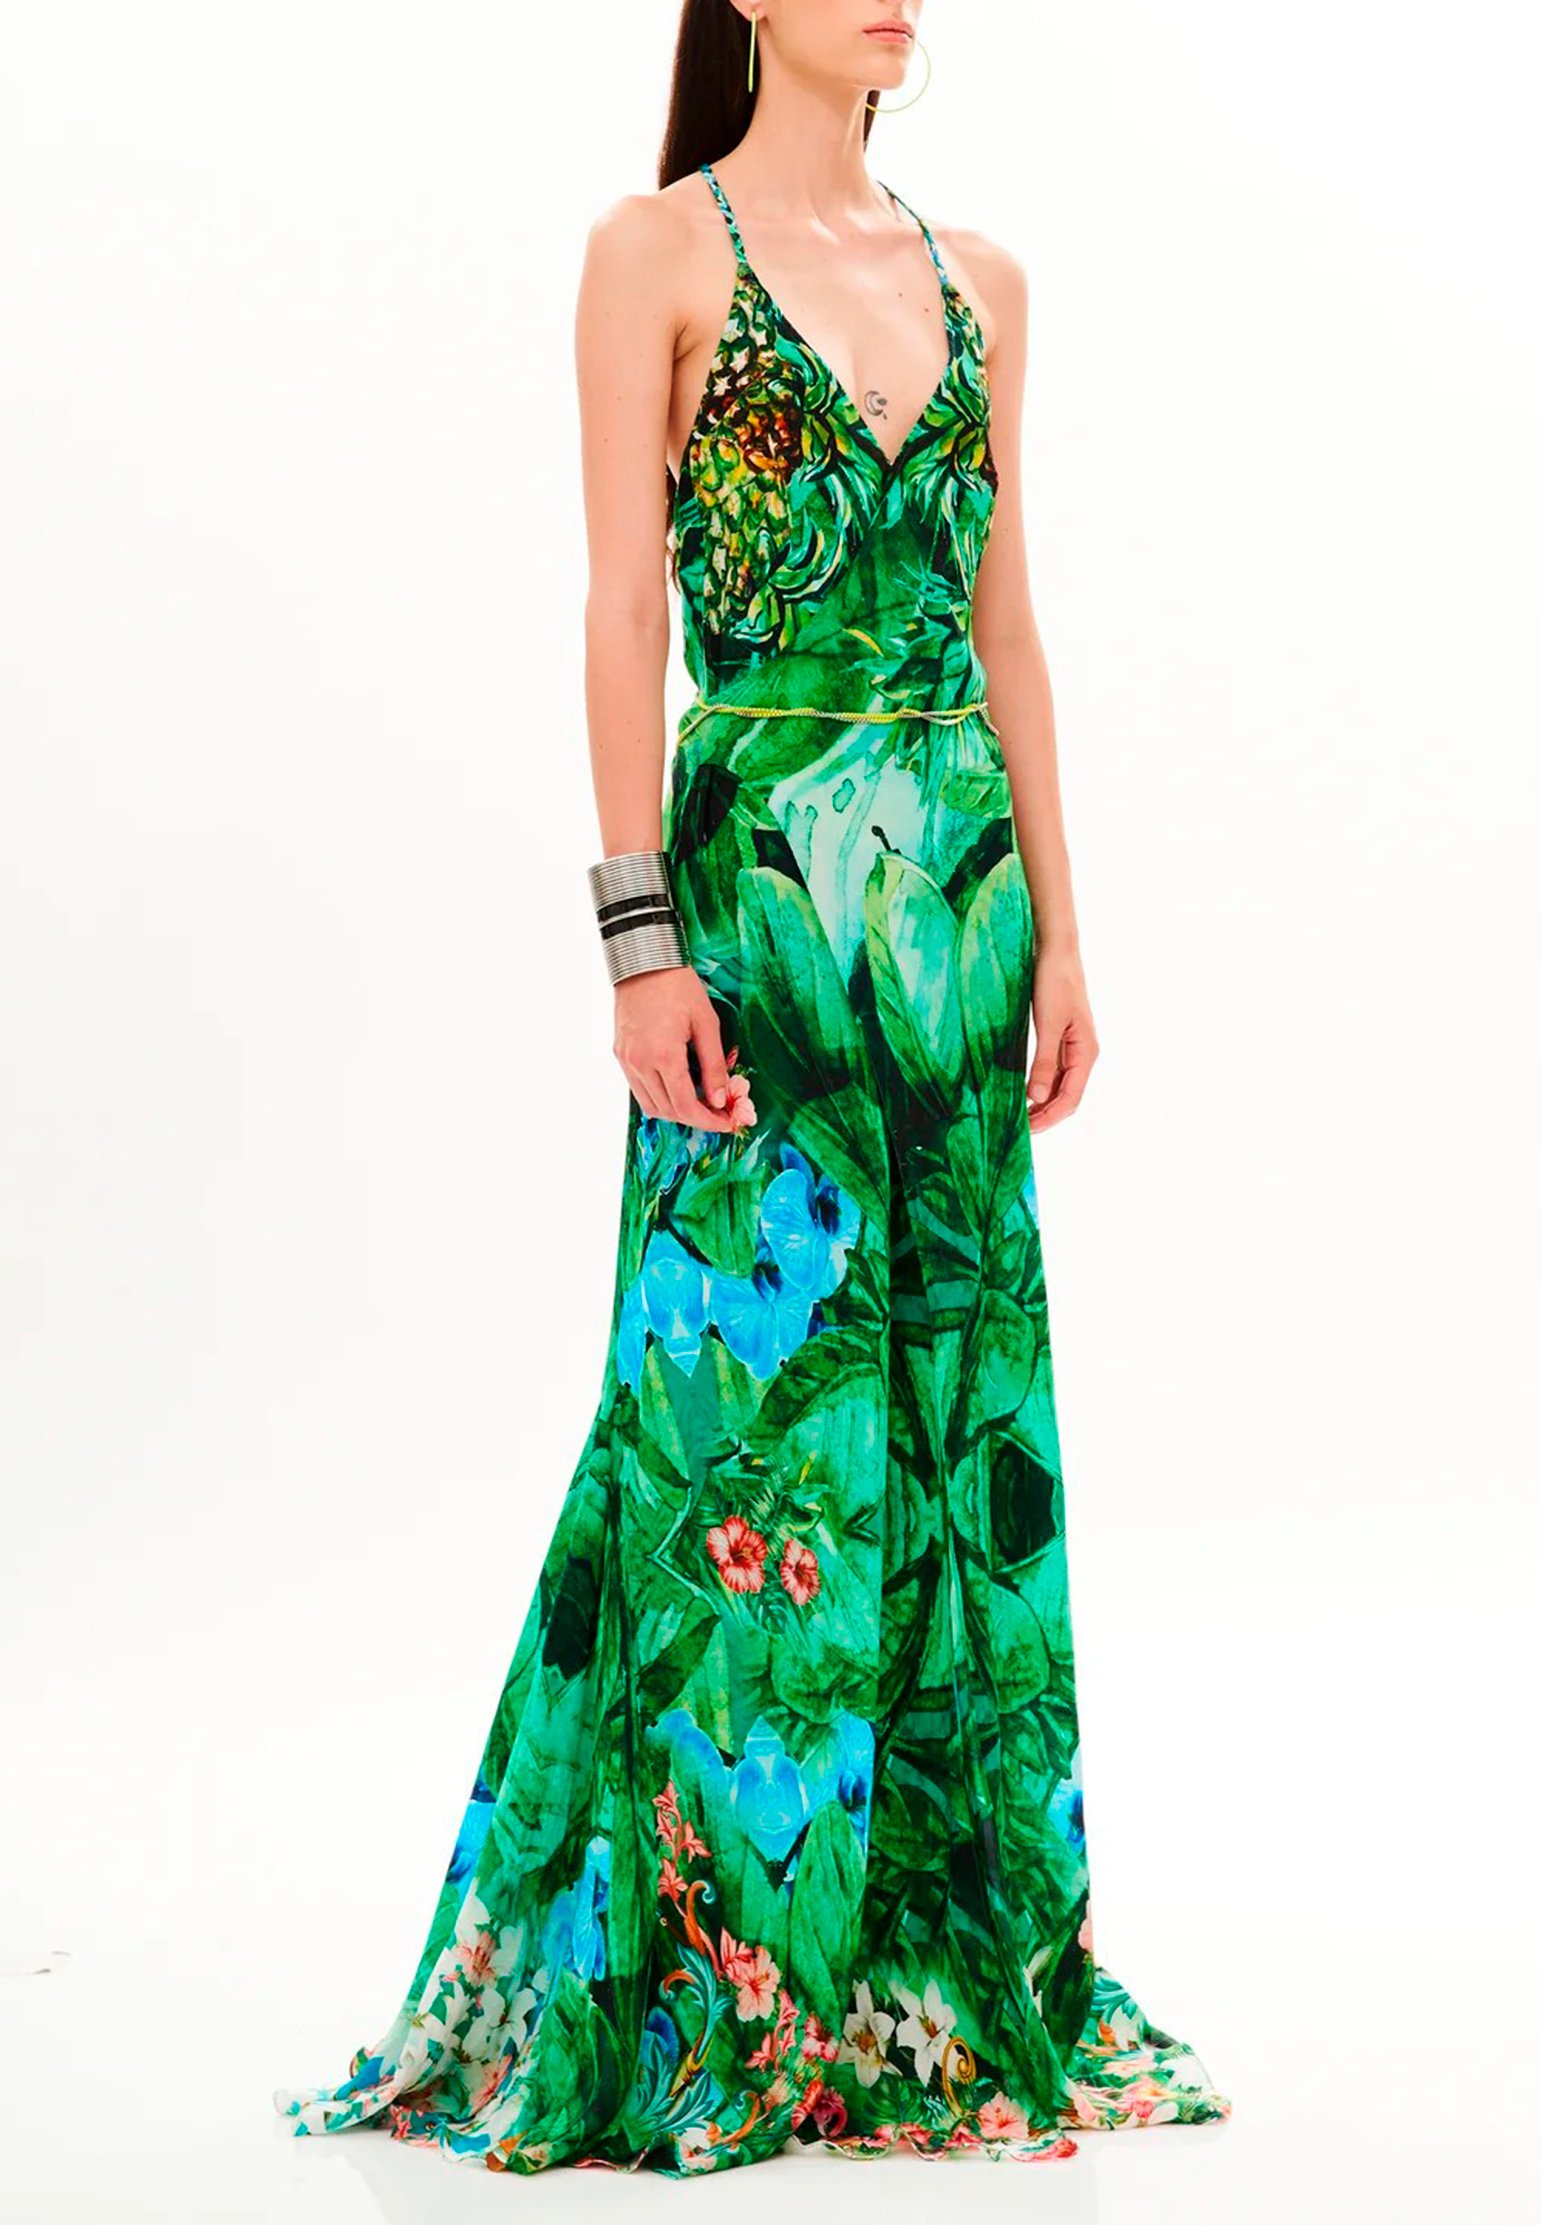 Dress KORE' COLLECTIONS Color: green (Code: 2304) in online store Allure